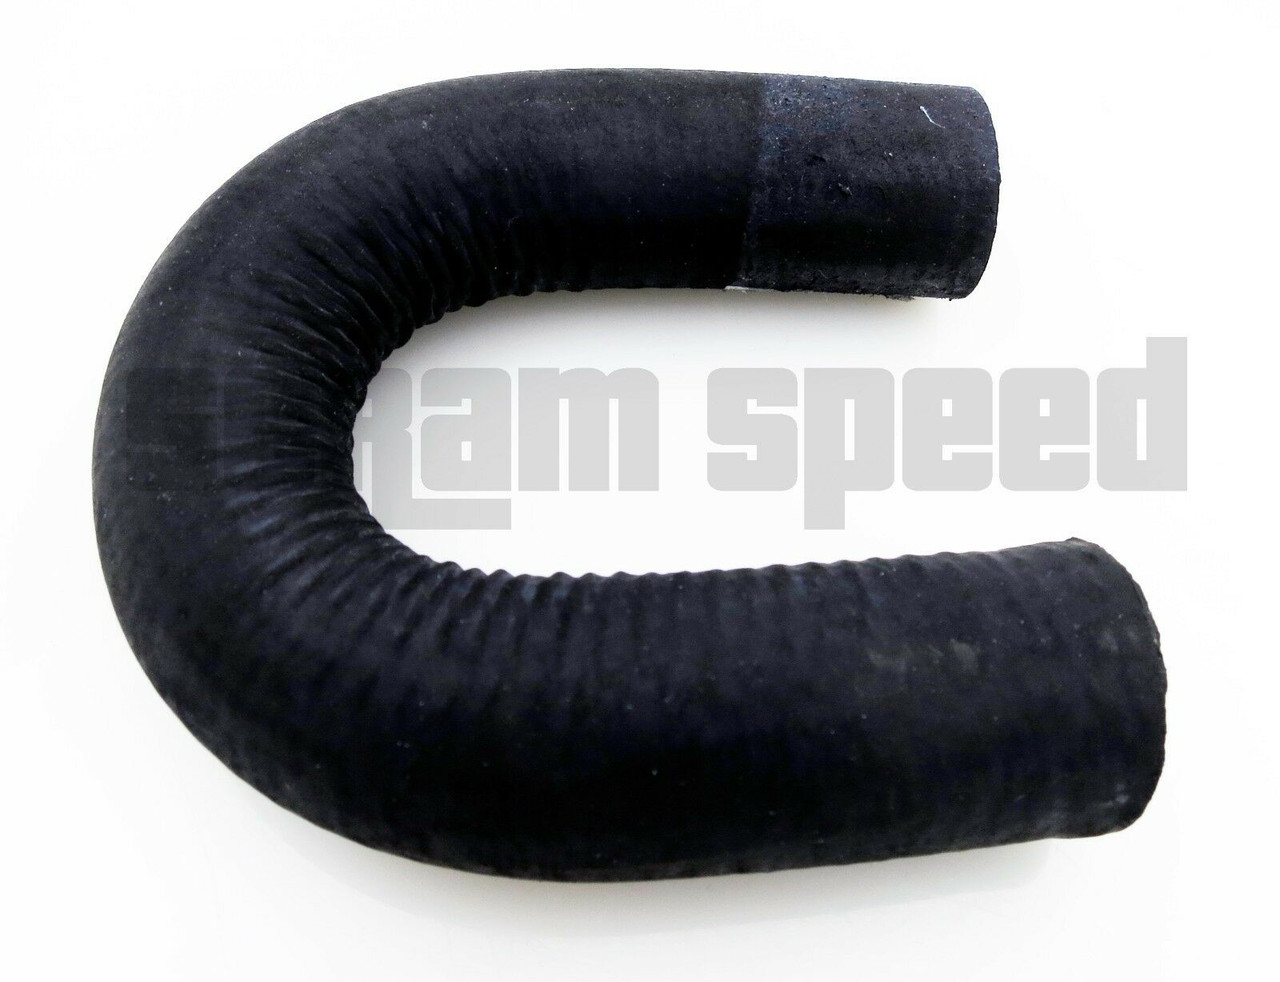 Our bypass hose is a cleaner, safer alternative to running caps.  The ends are the correct sizes for your LS water pump.